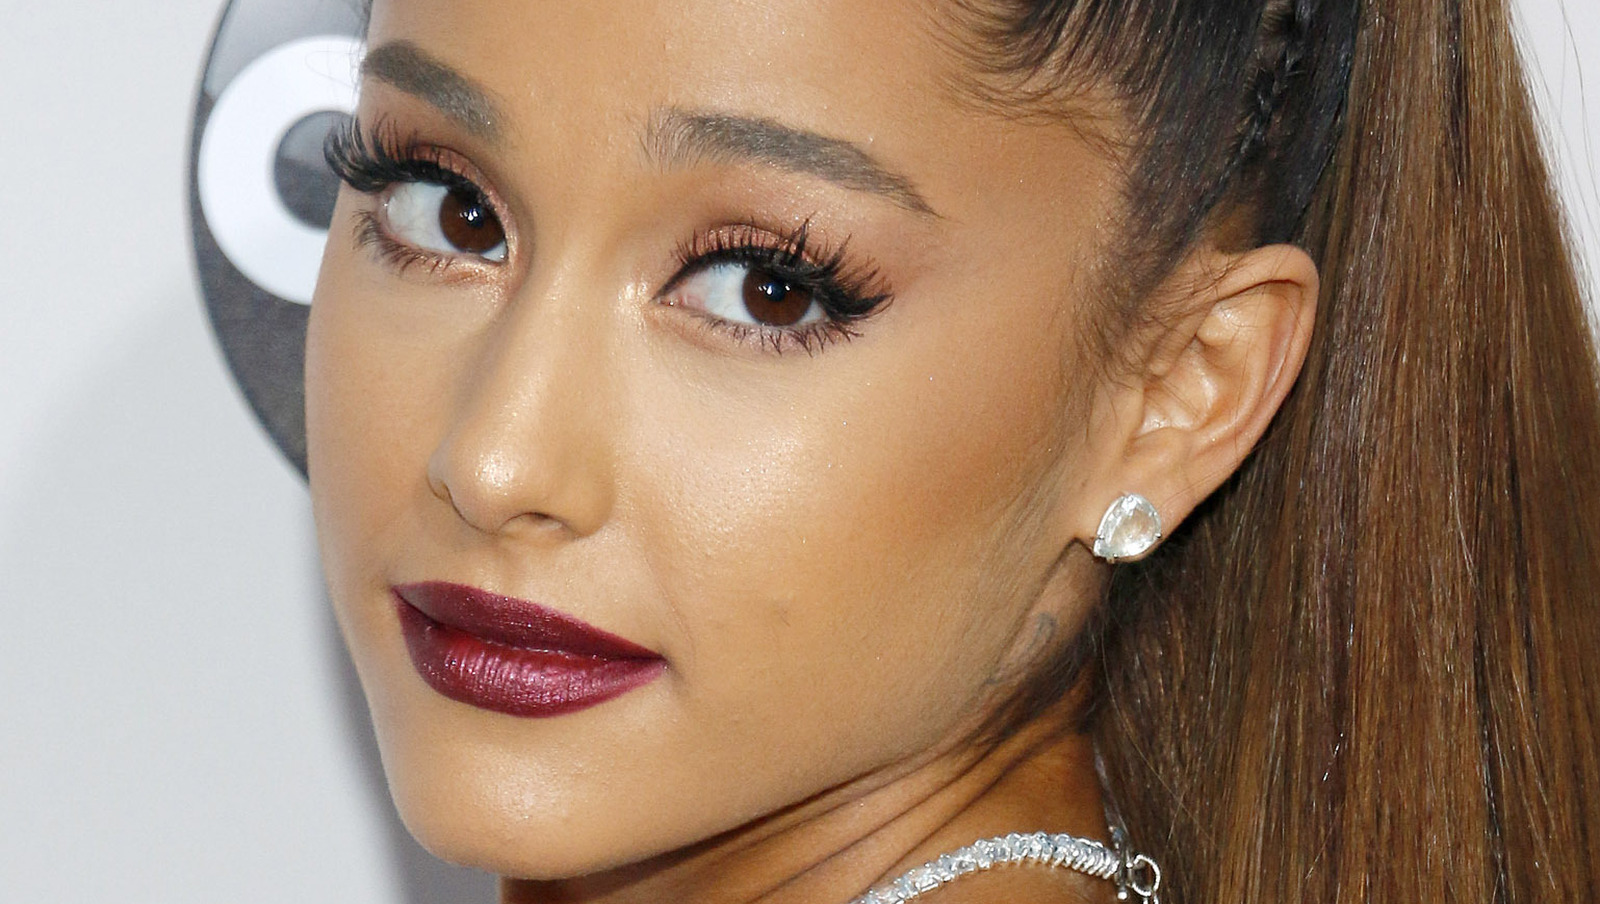 Ariana Grande's Brother Reveals New Details About Her Secret Wedding